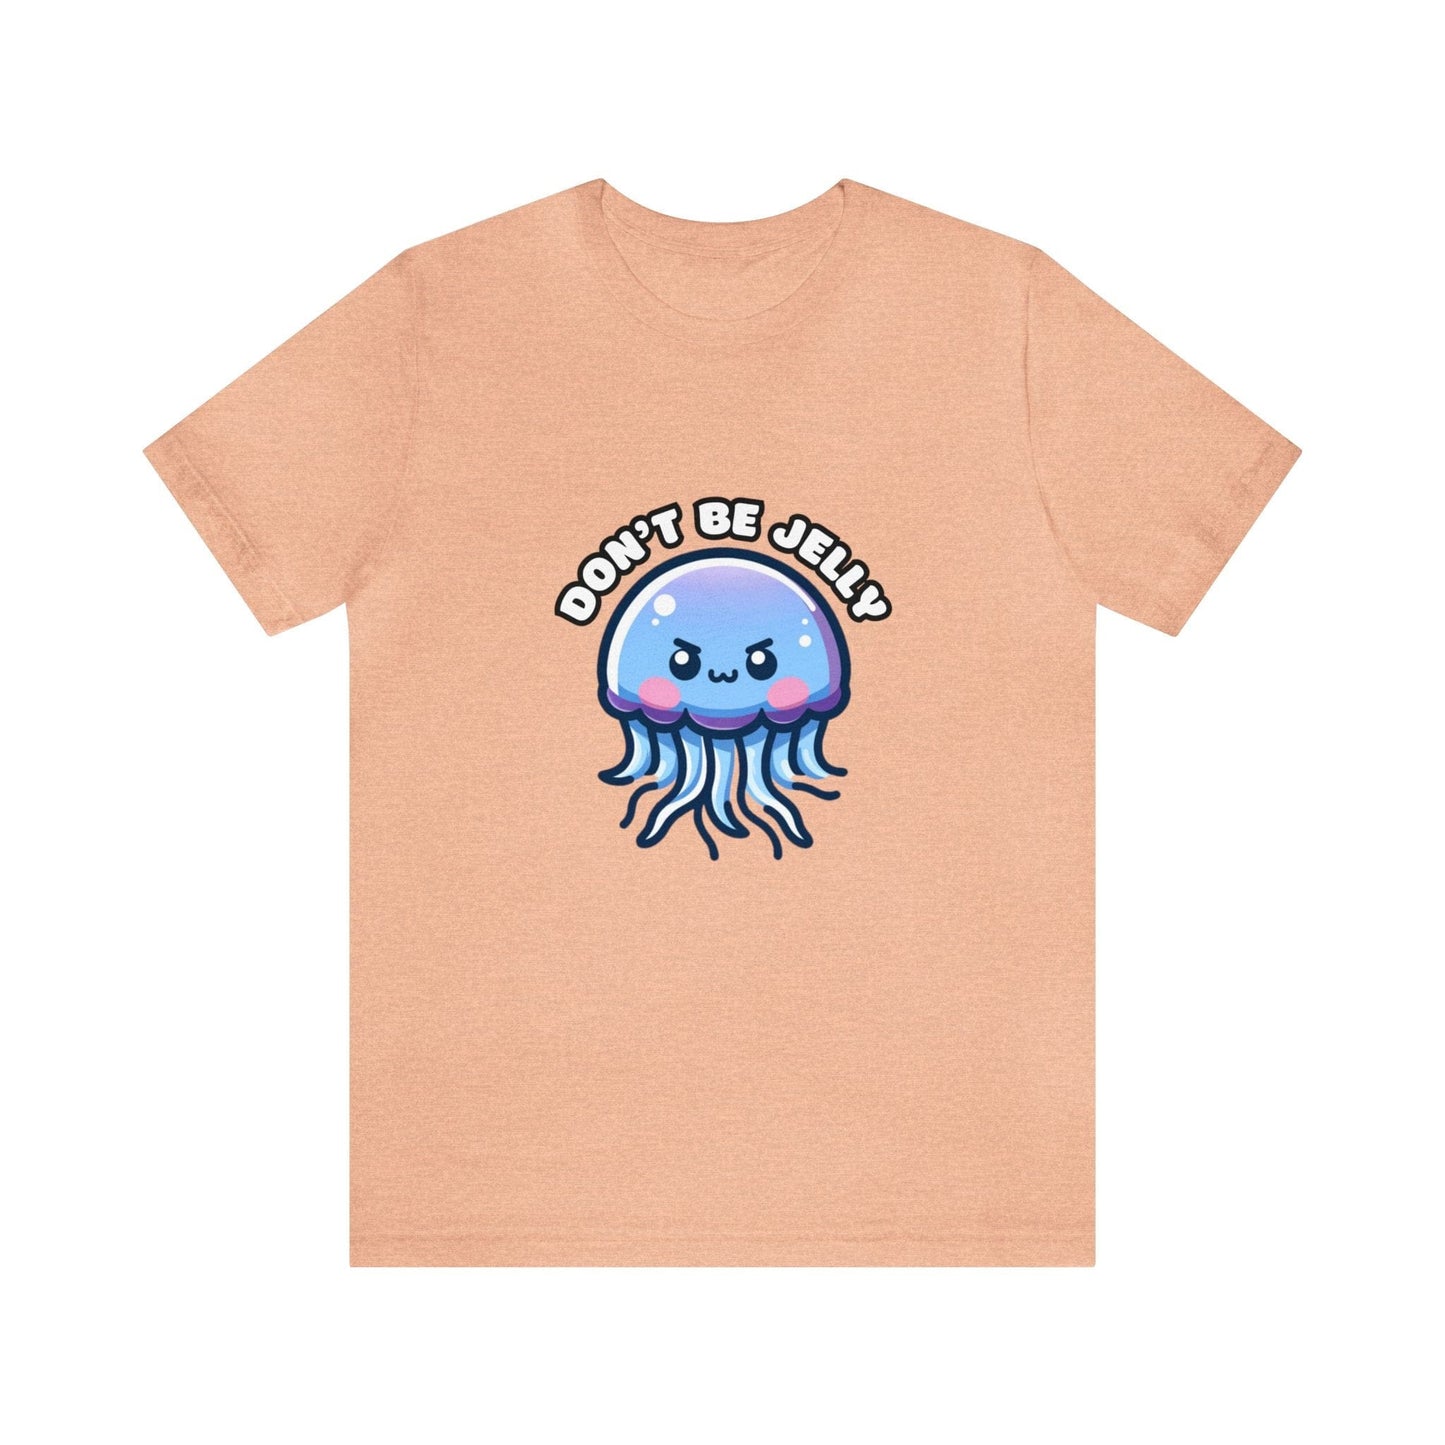 US - Don't Be Jelly - Jellyfish T-shirt Heather Peach / S